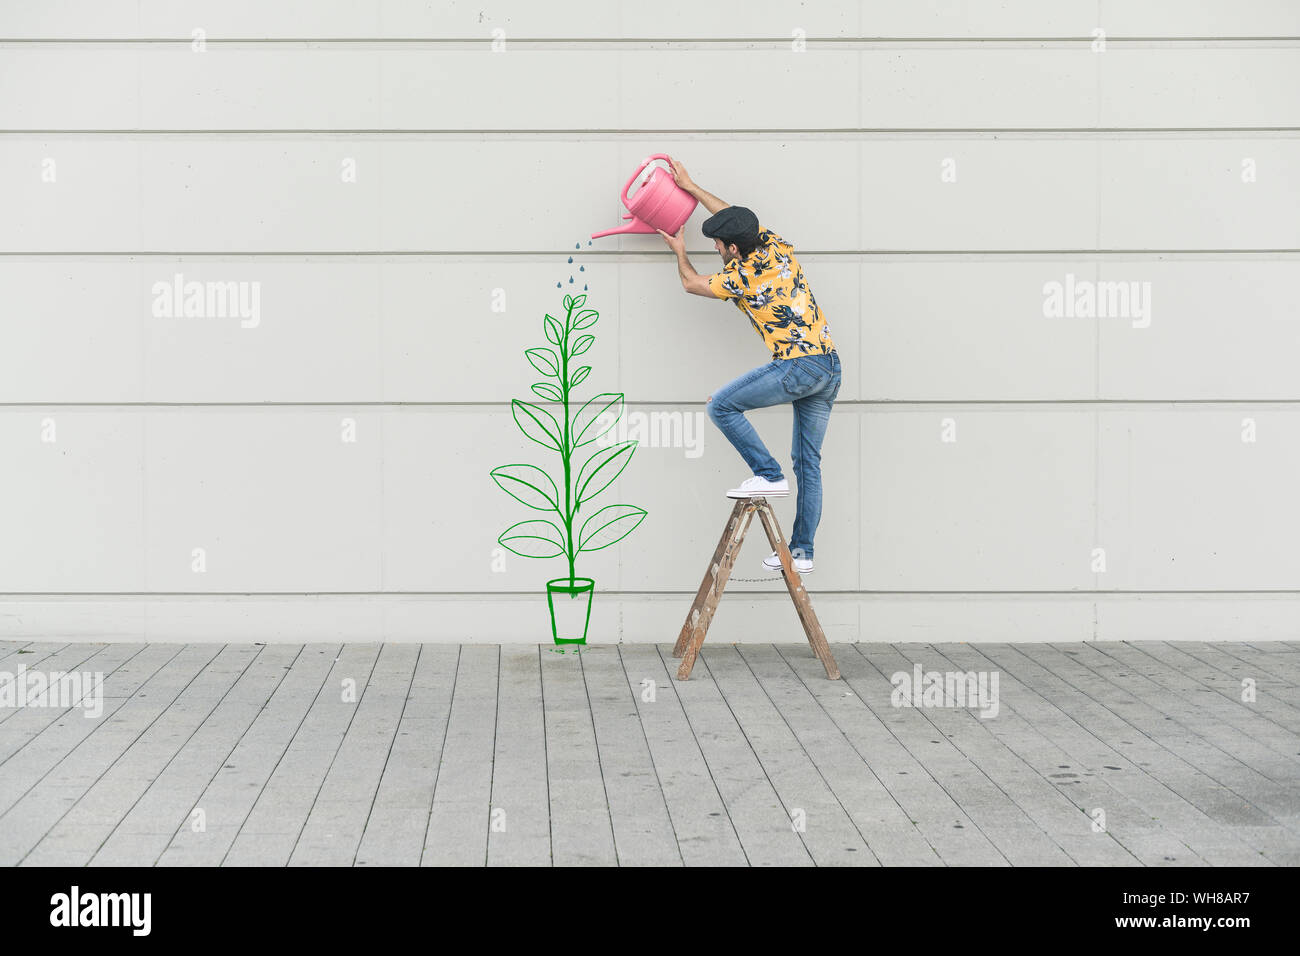 Digital composite of young man watering flower at a wall Stock Photo